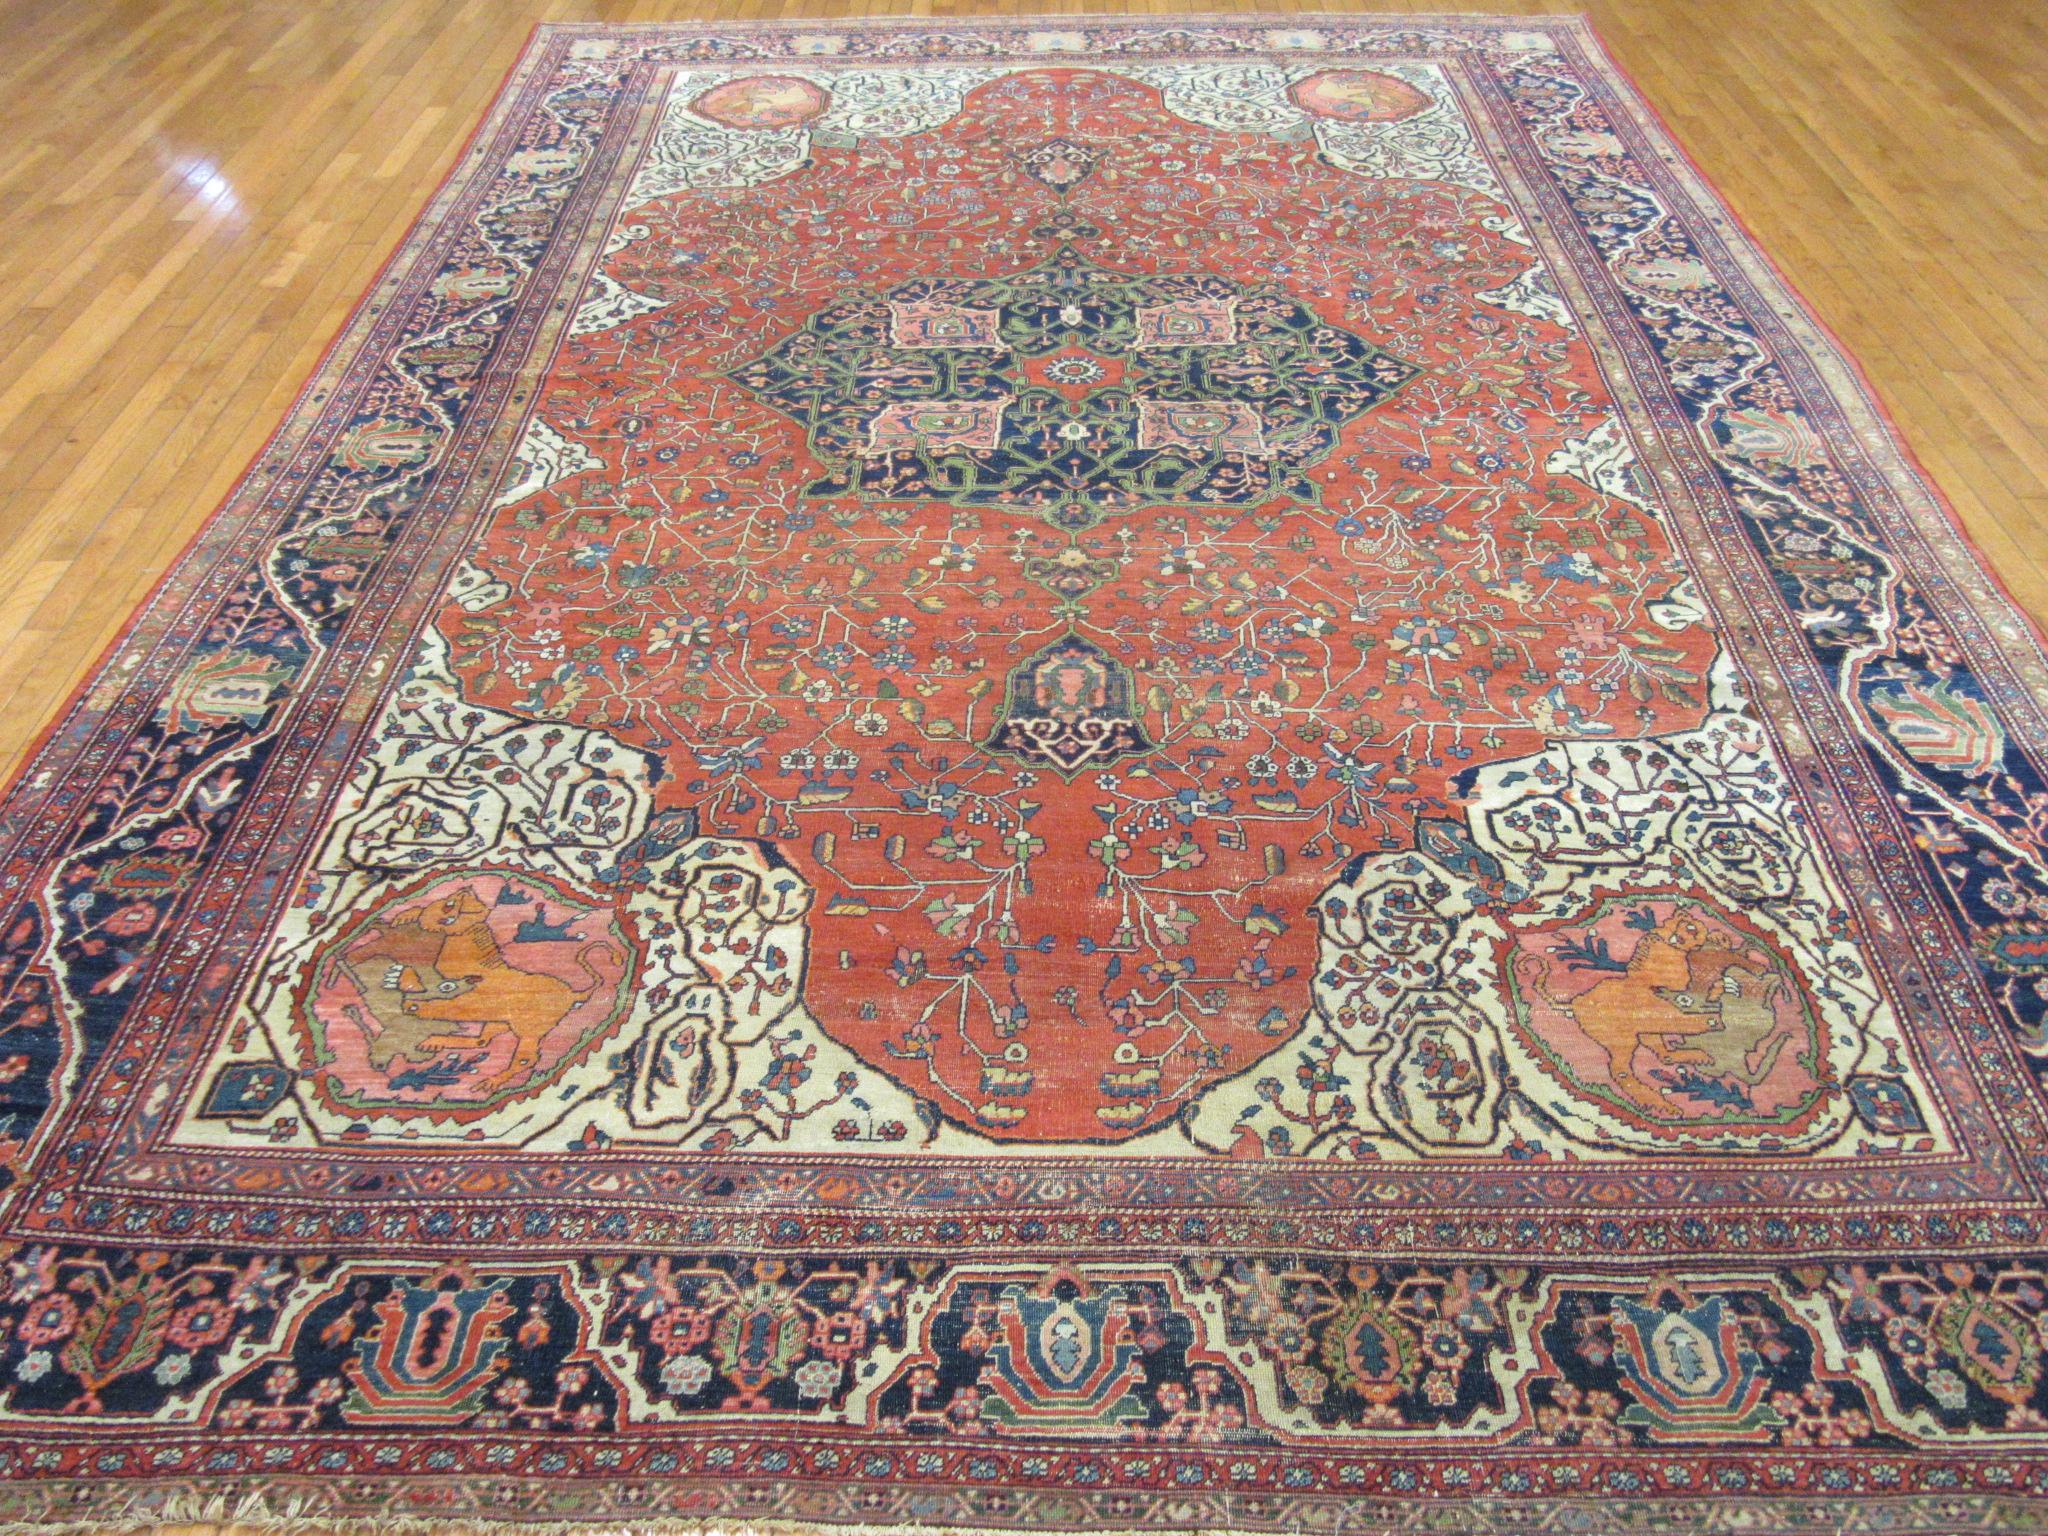 This is an antique hand-knotted Persian Sarouk Farahan rug made with wool colored with all natural dyes on a cotton foundation. The rug has a very unique finely hand knotted traditional corner and central medallion design with animal prints in the